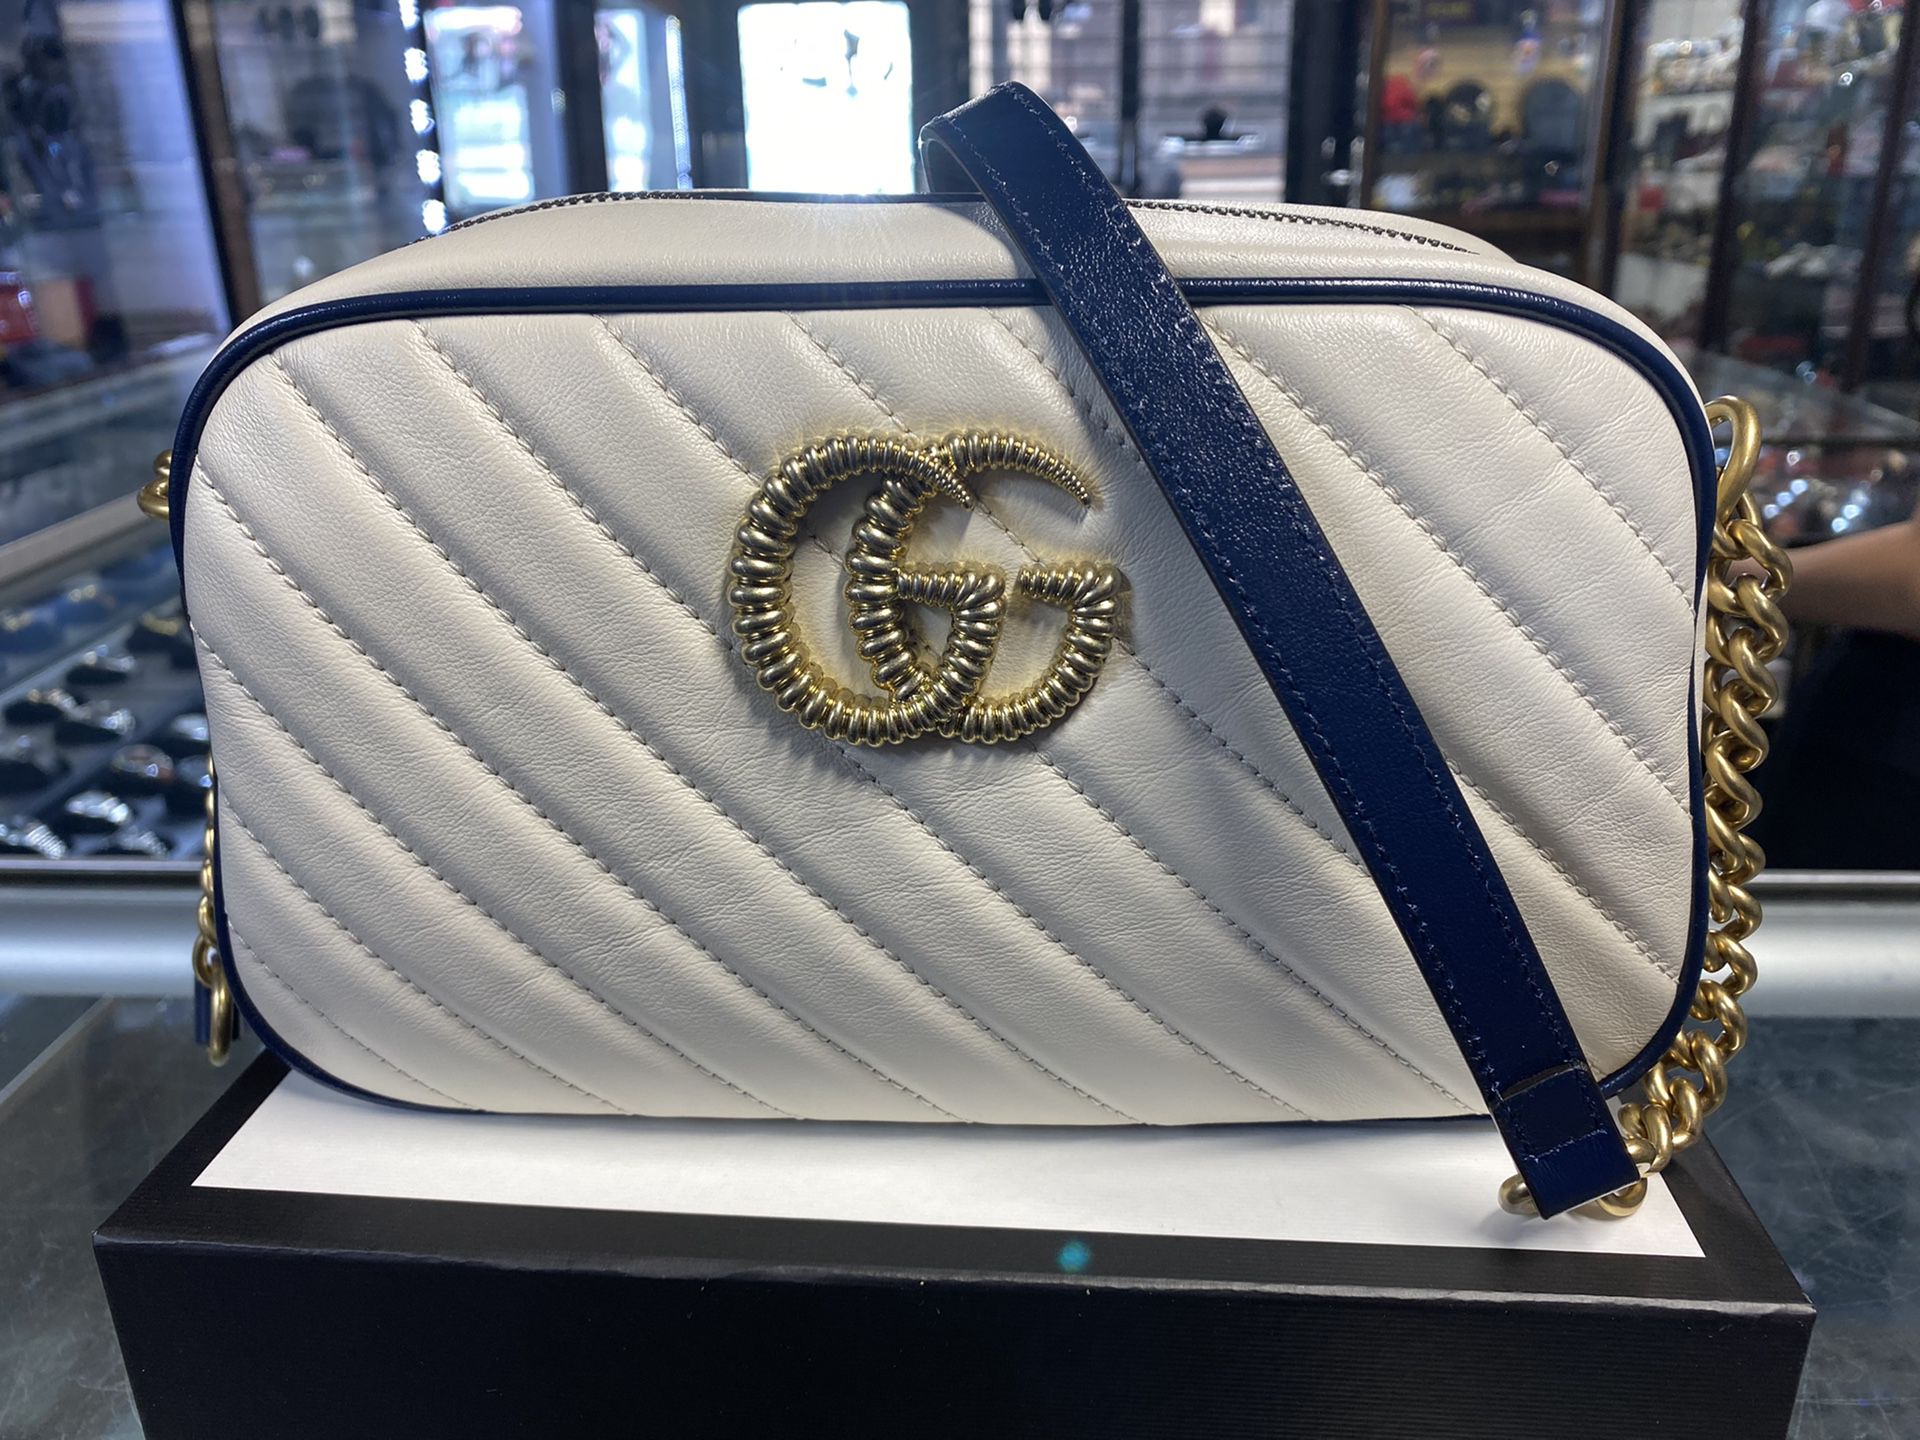 GUCCI MARMONT SMALL SHOULDER BAG PERFECT CHRISTMAS GIFT